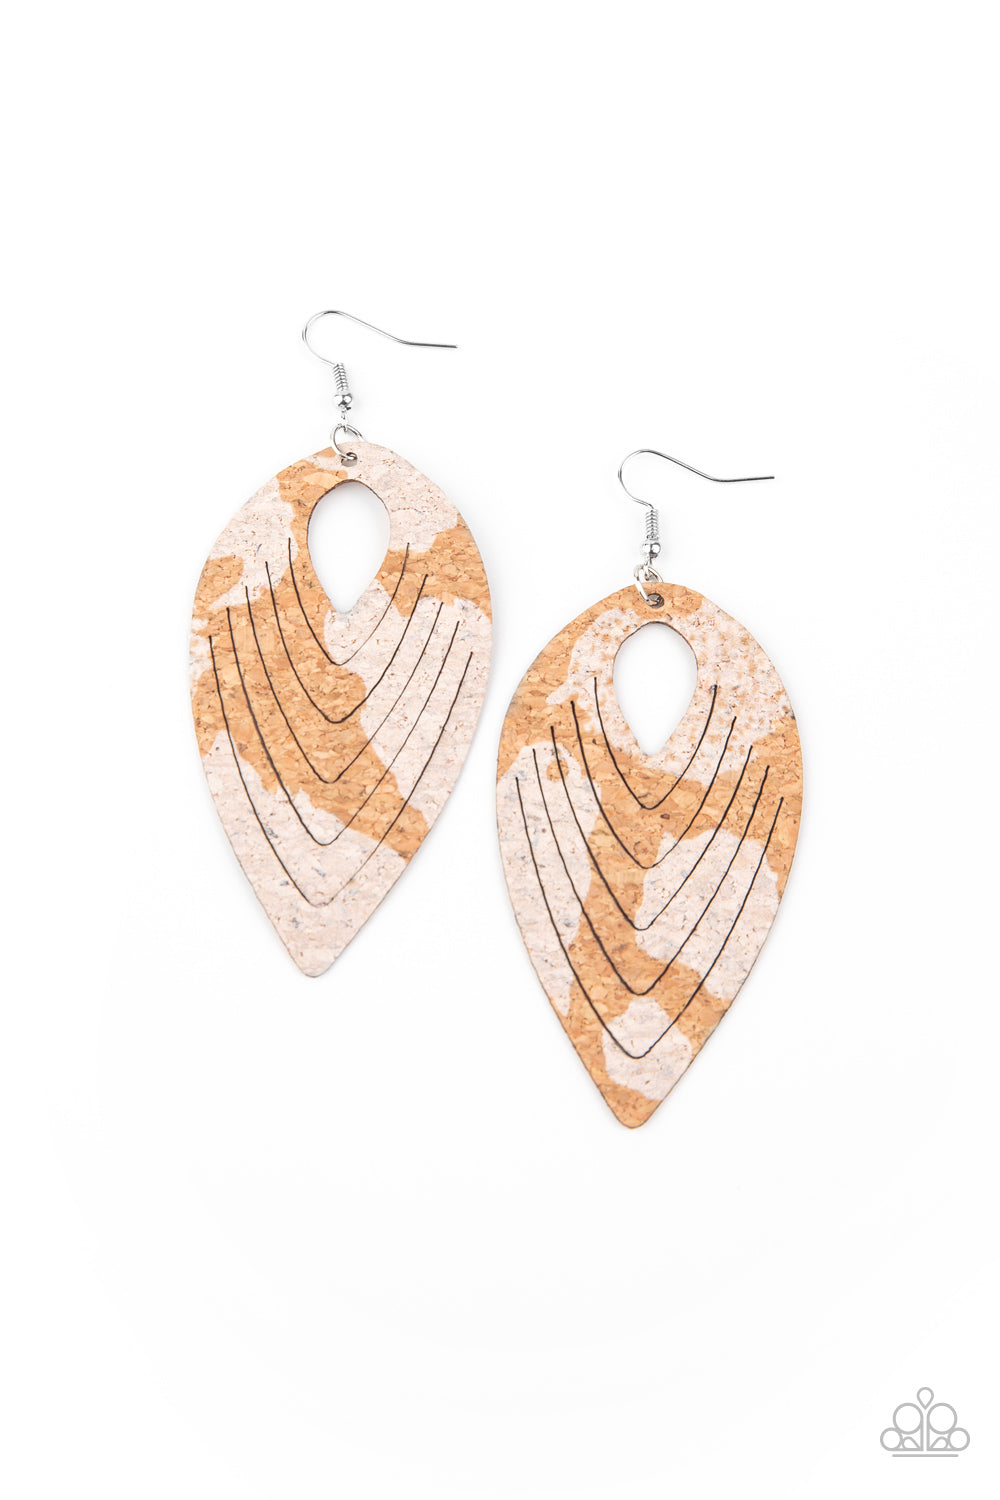 &lt;P&gt;Spotted in shimmery white accents, a flat cork teardrop is spliced into a rippling frame for an earthy fashion. Earring attaches to a standard fishhook fitting. &lt;/P&gt;  

&lt;P&gt; &lt;I&gt;  Sold as one pair of earrings. &lt;/I&gt;  &lt;/P&gt;

&lt;img src=\&quot;https://d9b54x484lq62.cloudfront.net/paparazzi/shopping/images/517_tag150x115_1.png\&quot; alt=\&quot;New Kit\&quot; align=\&quot;middle\&quot; height=\&quot;50\&quot; width=\&quot;50\&quot;/&gt;